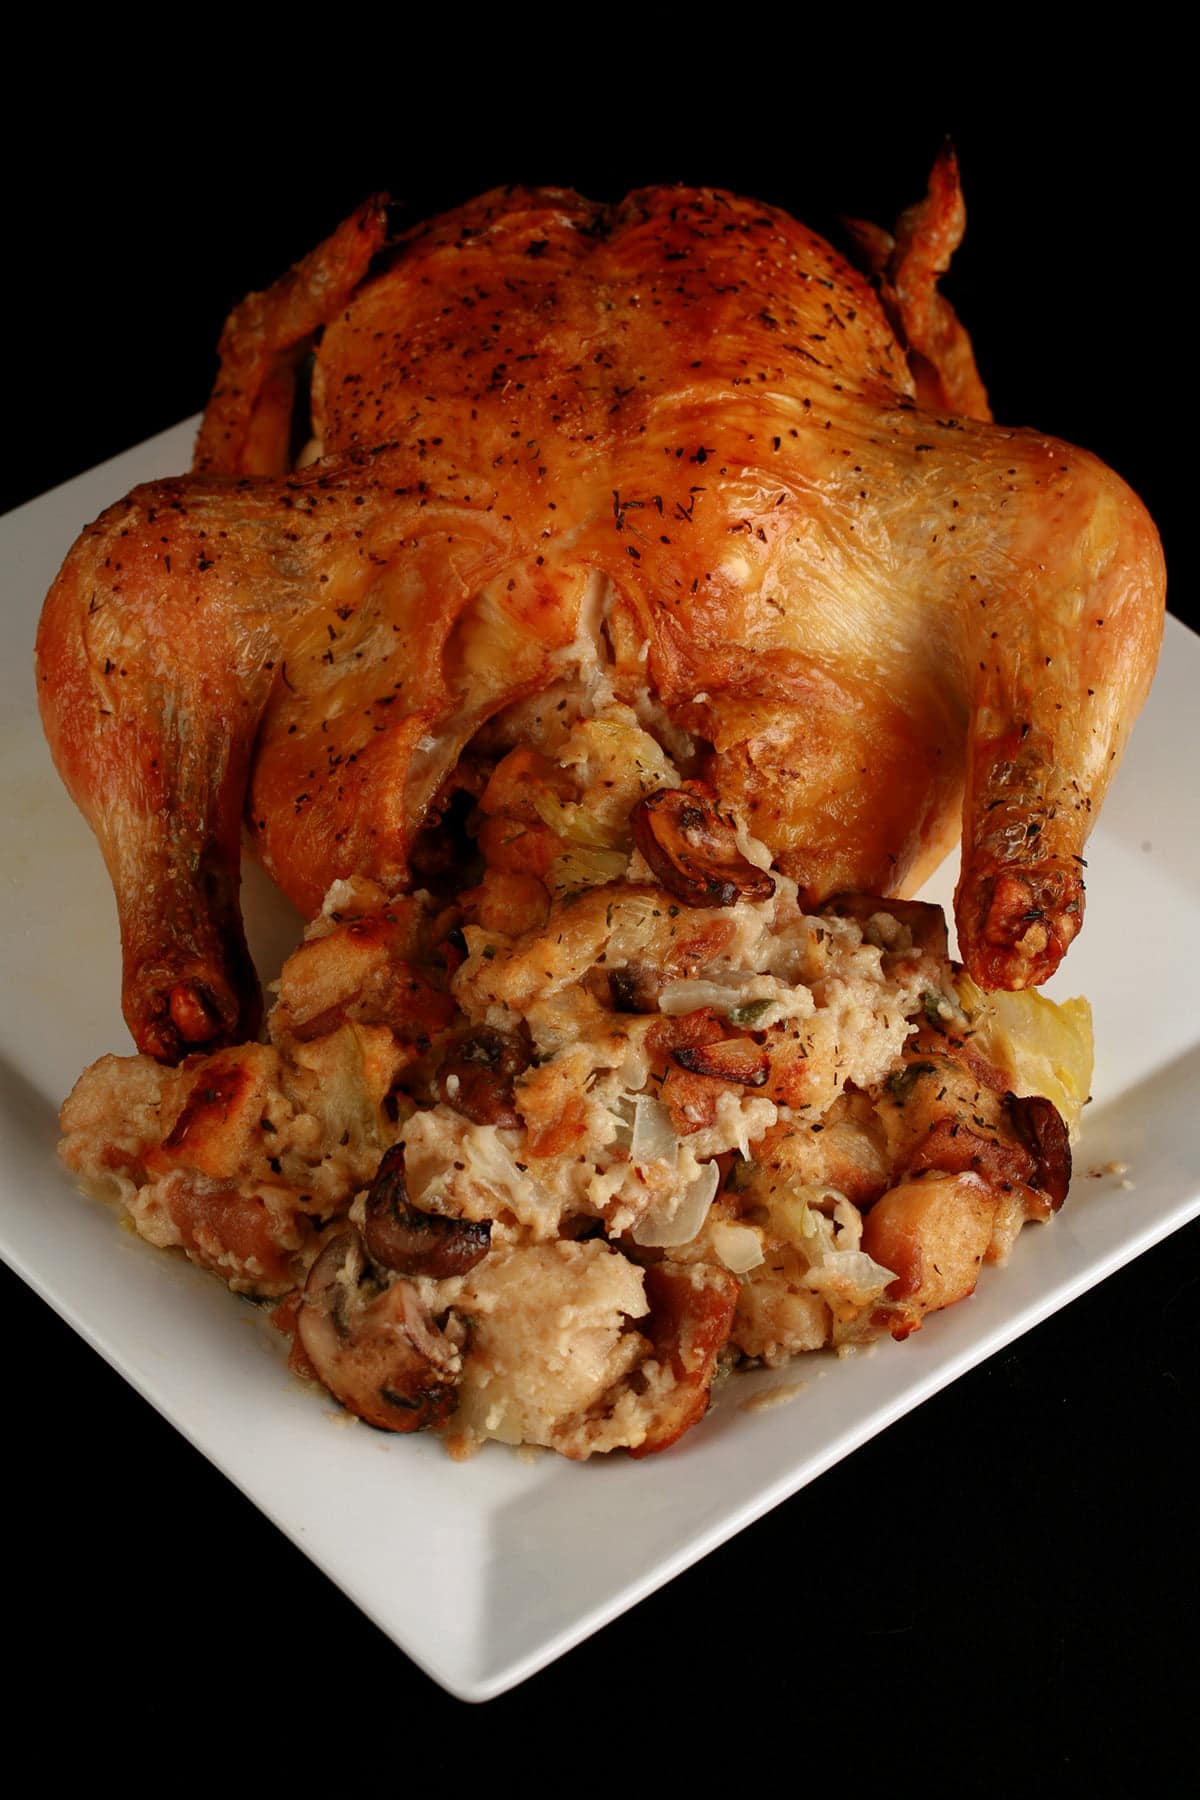 Close up image of a roasted turkey, with an abundance of stuffing visible. It is on a white plate.